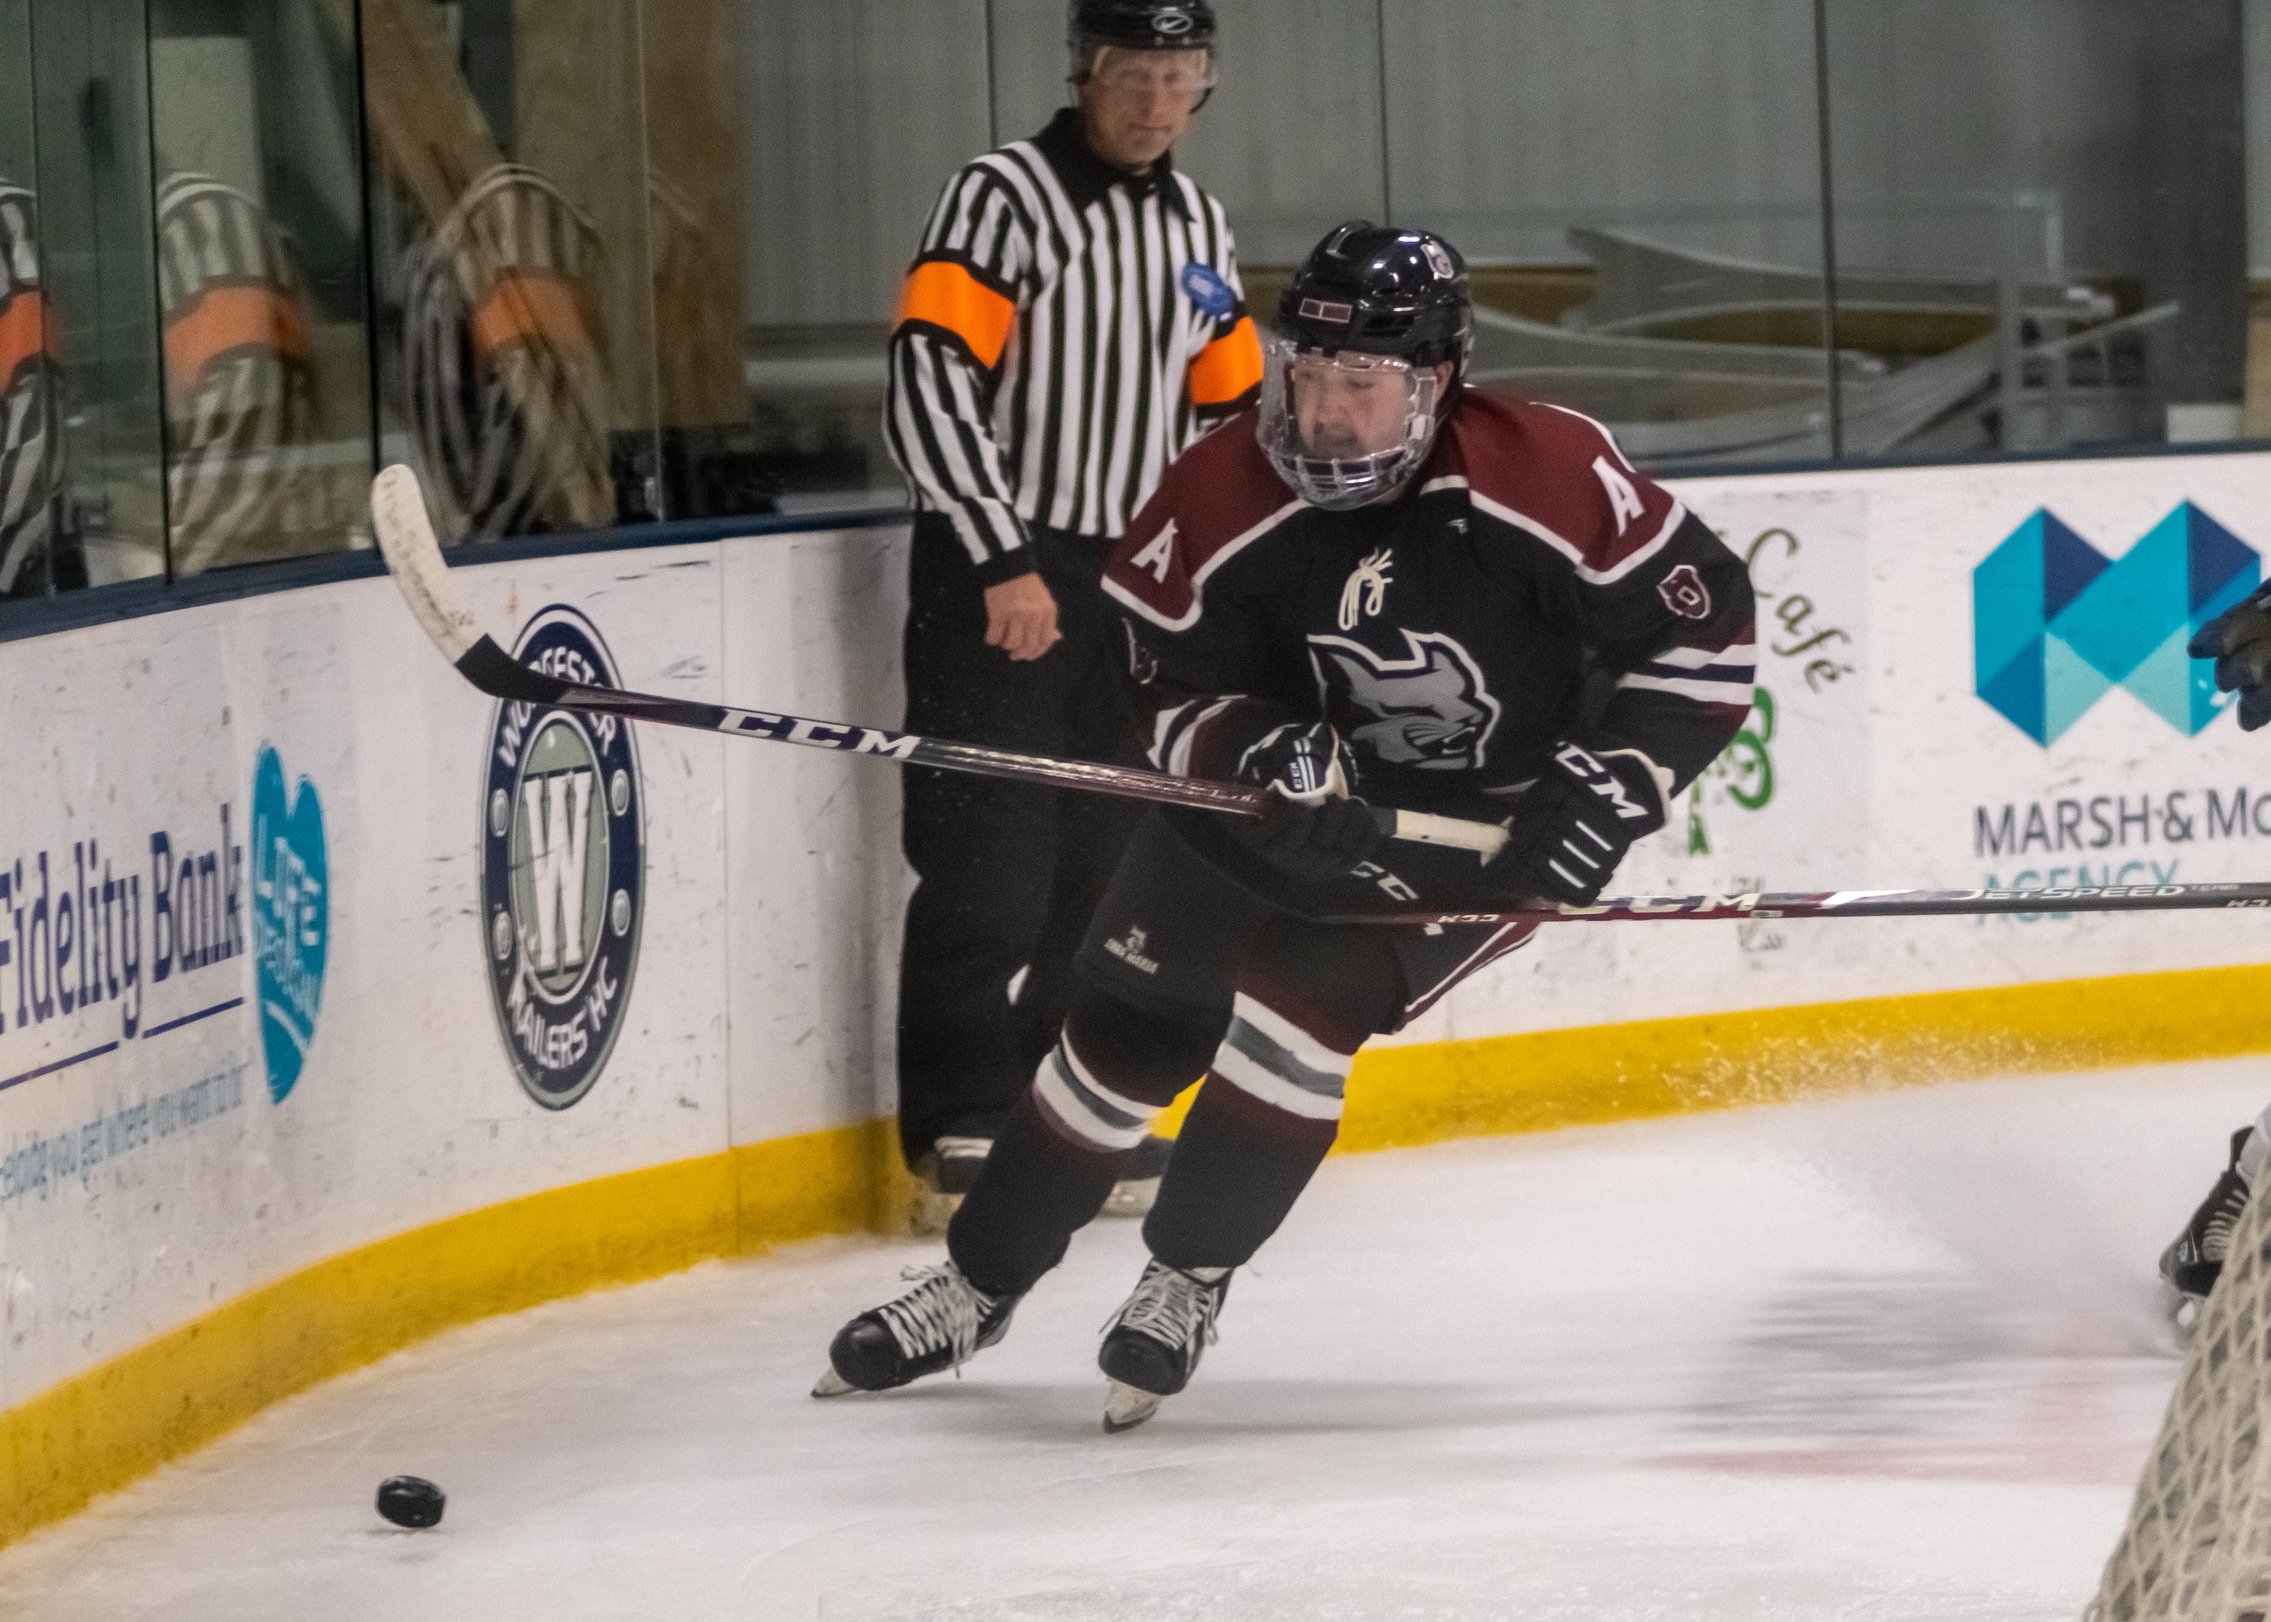 Men's Ice Hockey: Byrnes Leads AMCATS In Win Over New England College